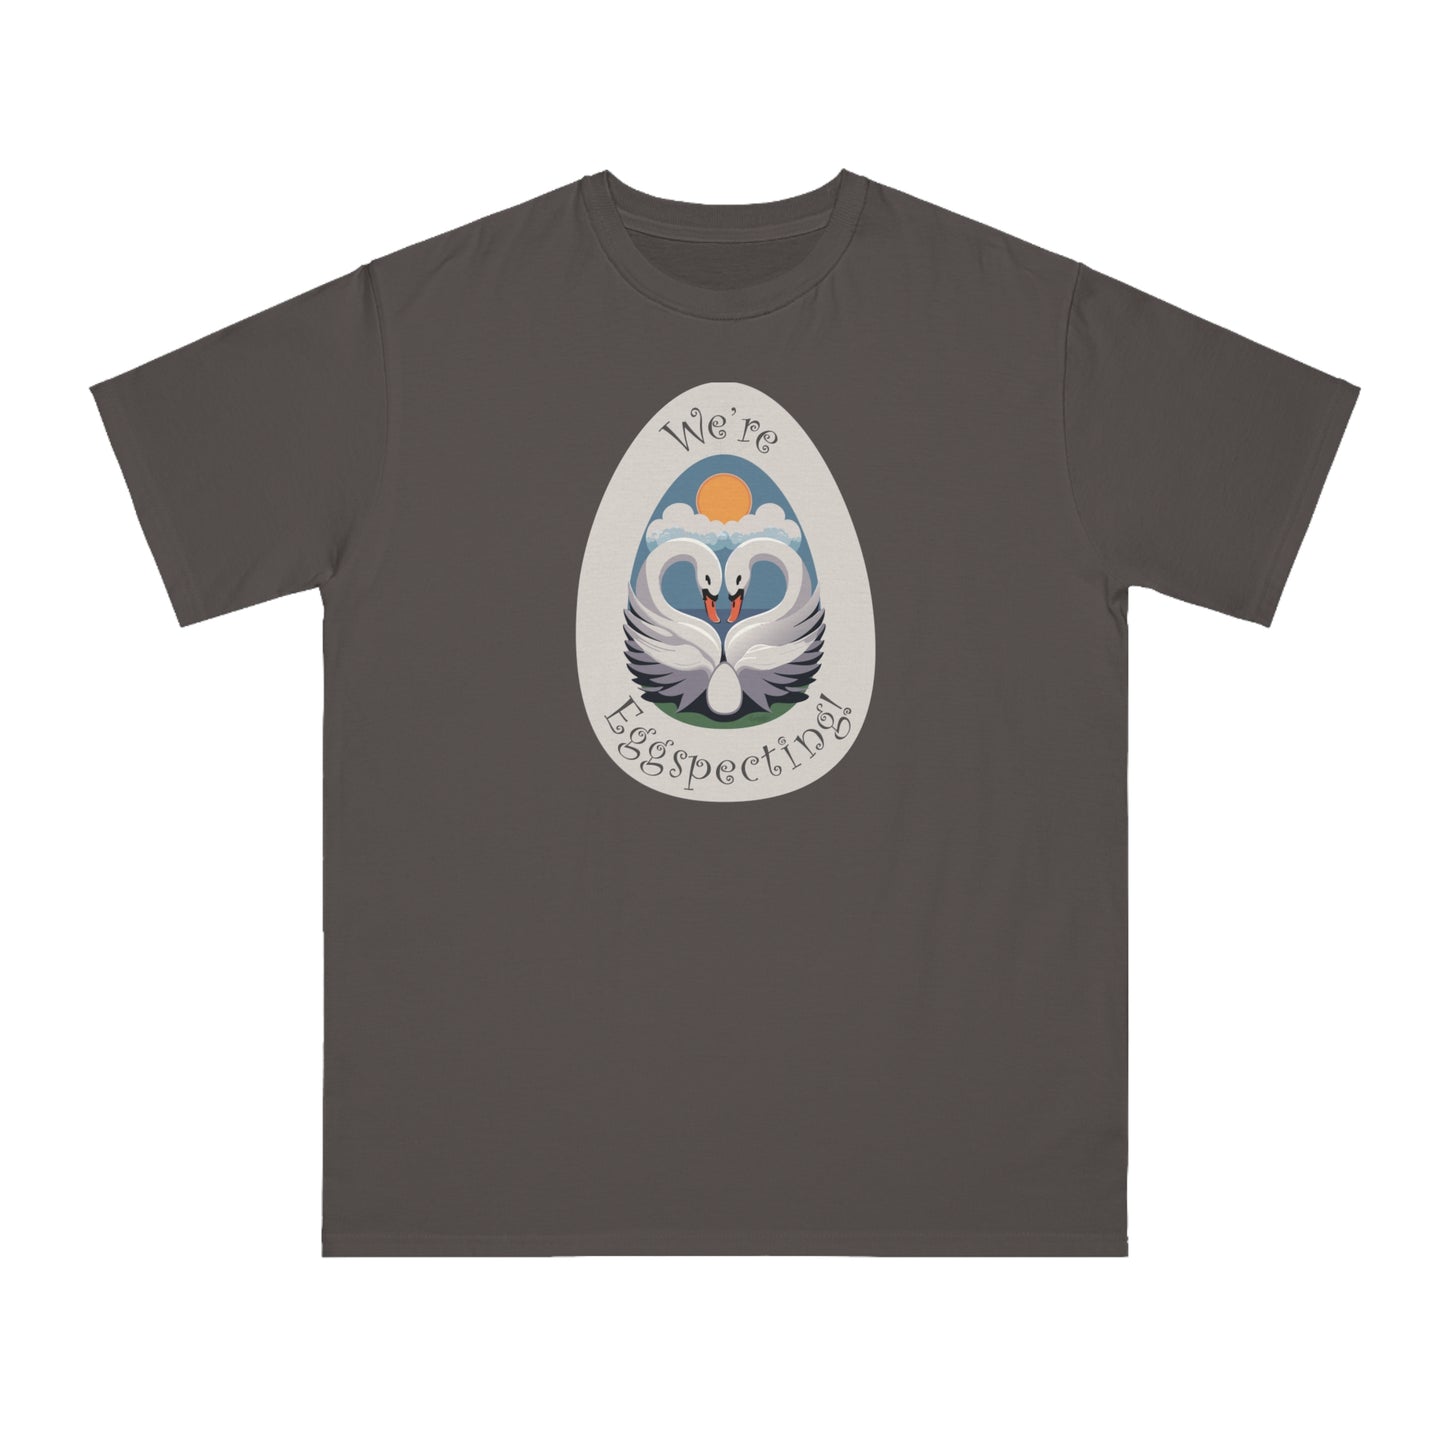 Celebrate New Arrivals in Eco-Conscious Style with Our "We're Eggspecting!" Organic Unisex T-Shirts